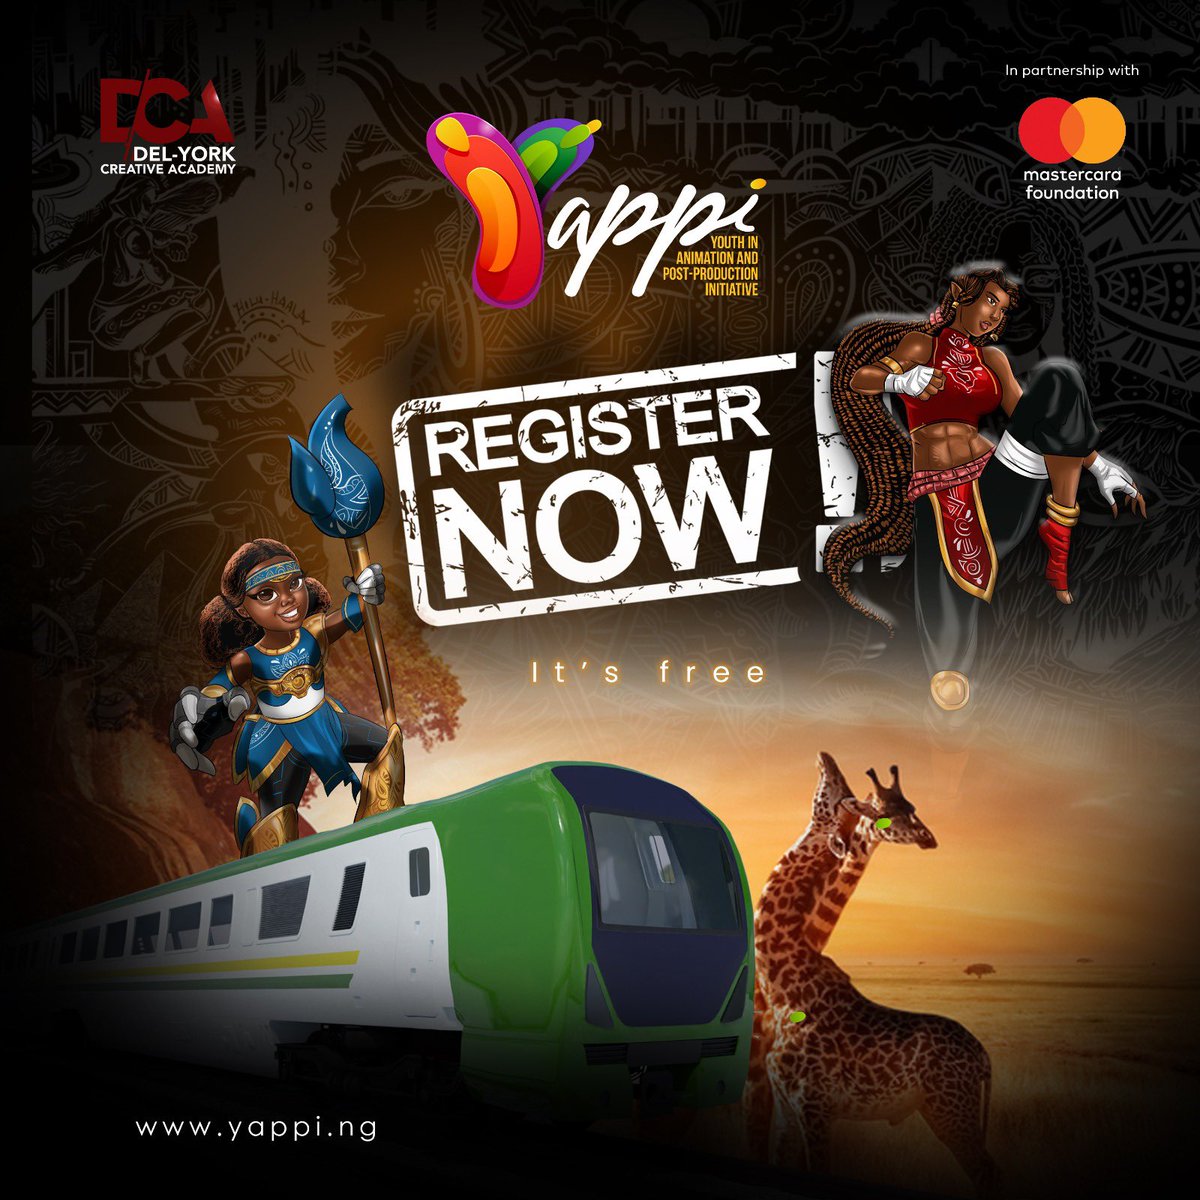 More than 13,32k entries have been received!
Register today, it is free!!!
°°
#numbersdontlie #dontsleeponit #registernow #joinyappi #beyappi #yappinigeria